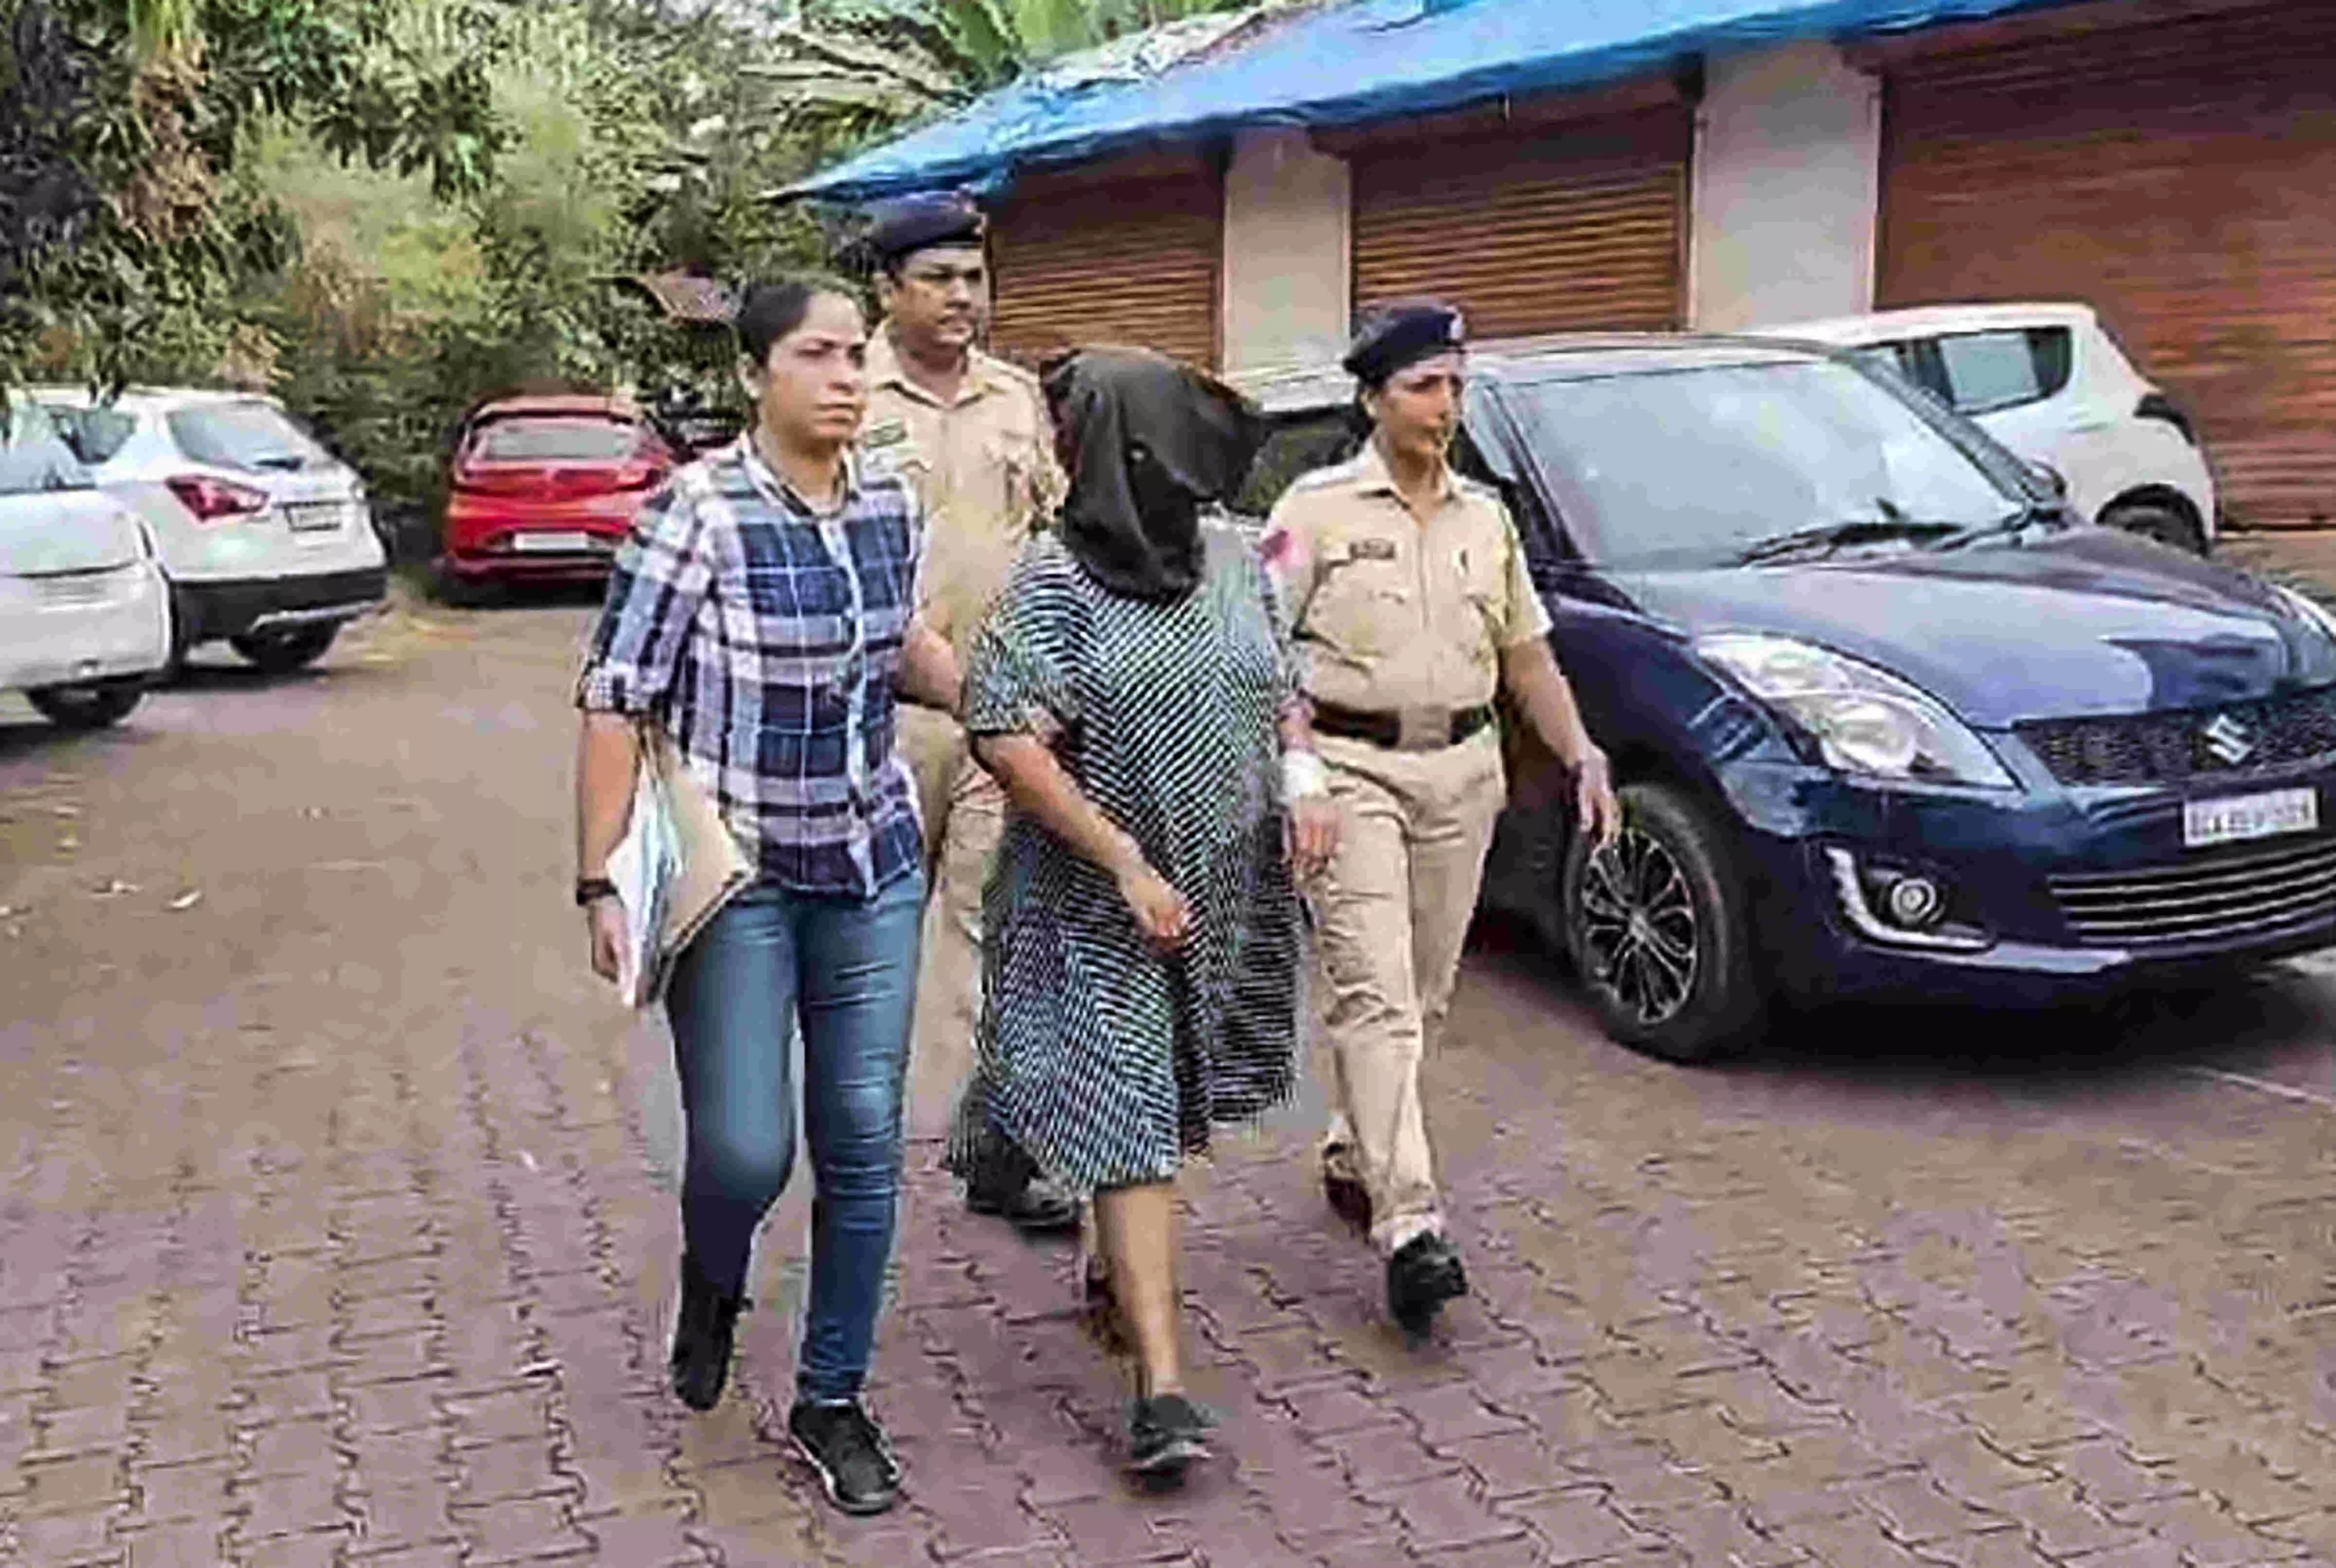 Start-up firm CEO kills her 4-yr-old son in Goa, travels to Karnataka by stuffing body in bag; held